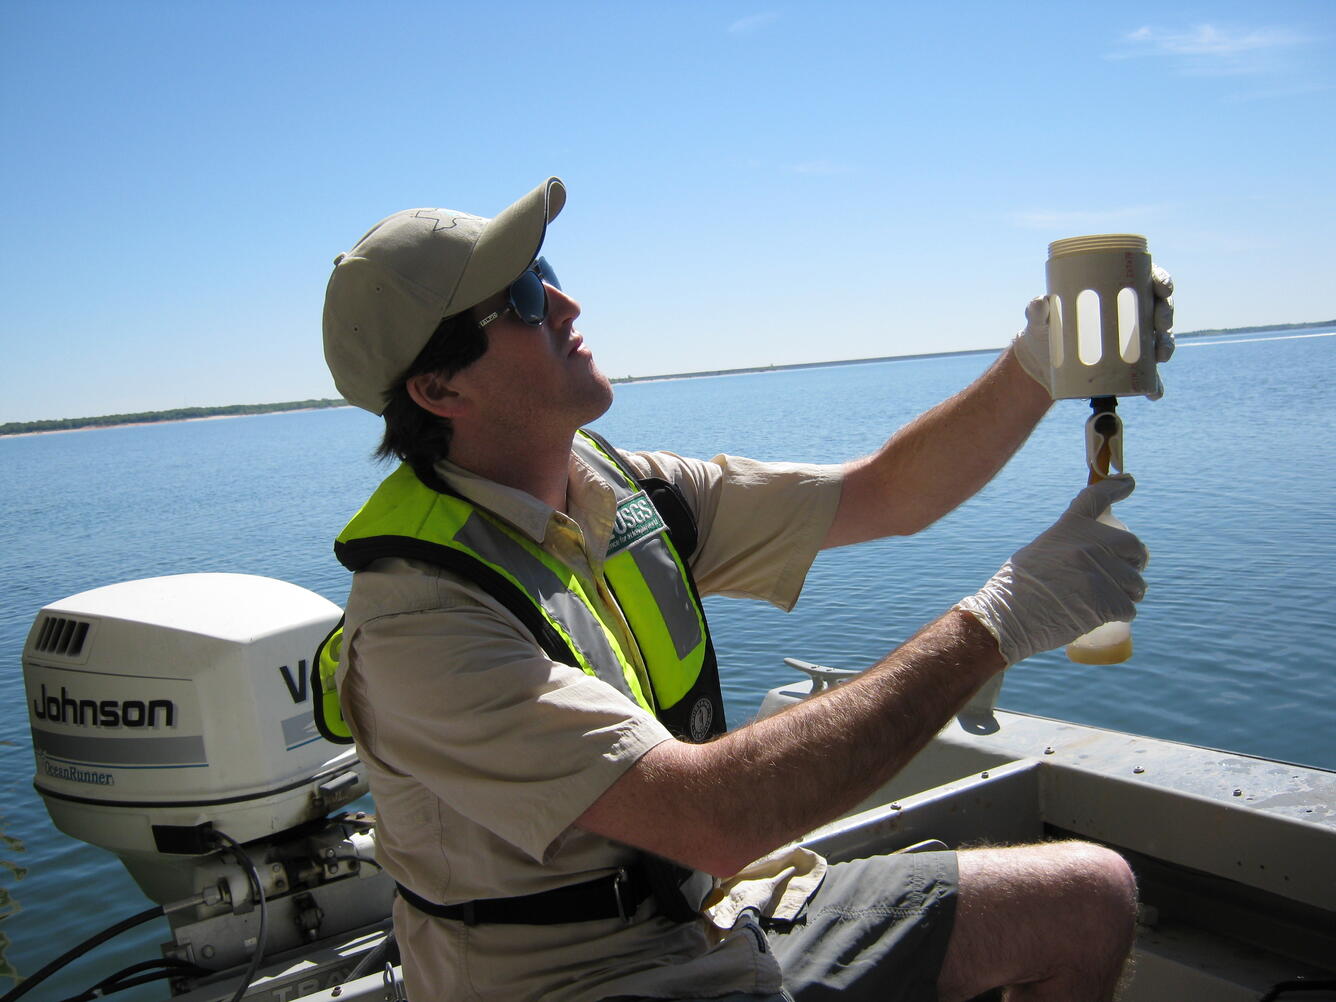 Collecting water samples at Lake Texoma, Tex., as part of the zebra mussel monitoring program